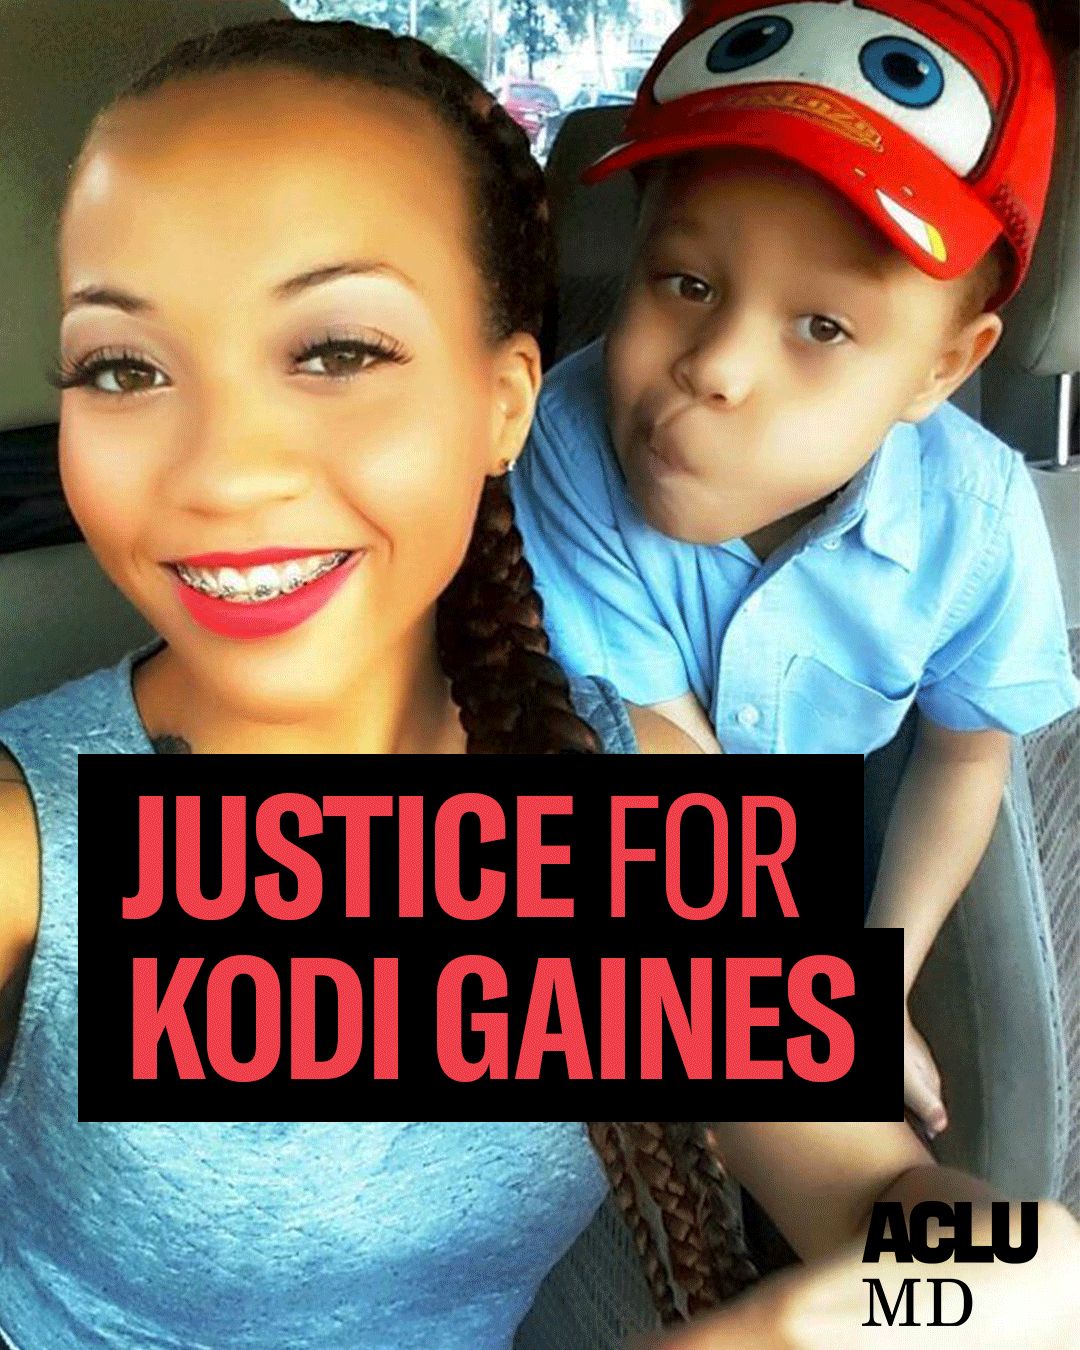 Justice for Kodi Gaines. Korryn Gaines, a Black woman with her hair in a braid, smiling, and wearing red lipstick, and her son Kodi, who is wearing a red hat and blue shirt, are taking a selfie and looking at the camera.